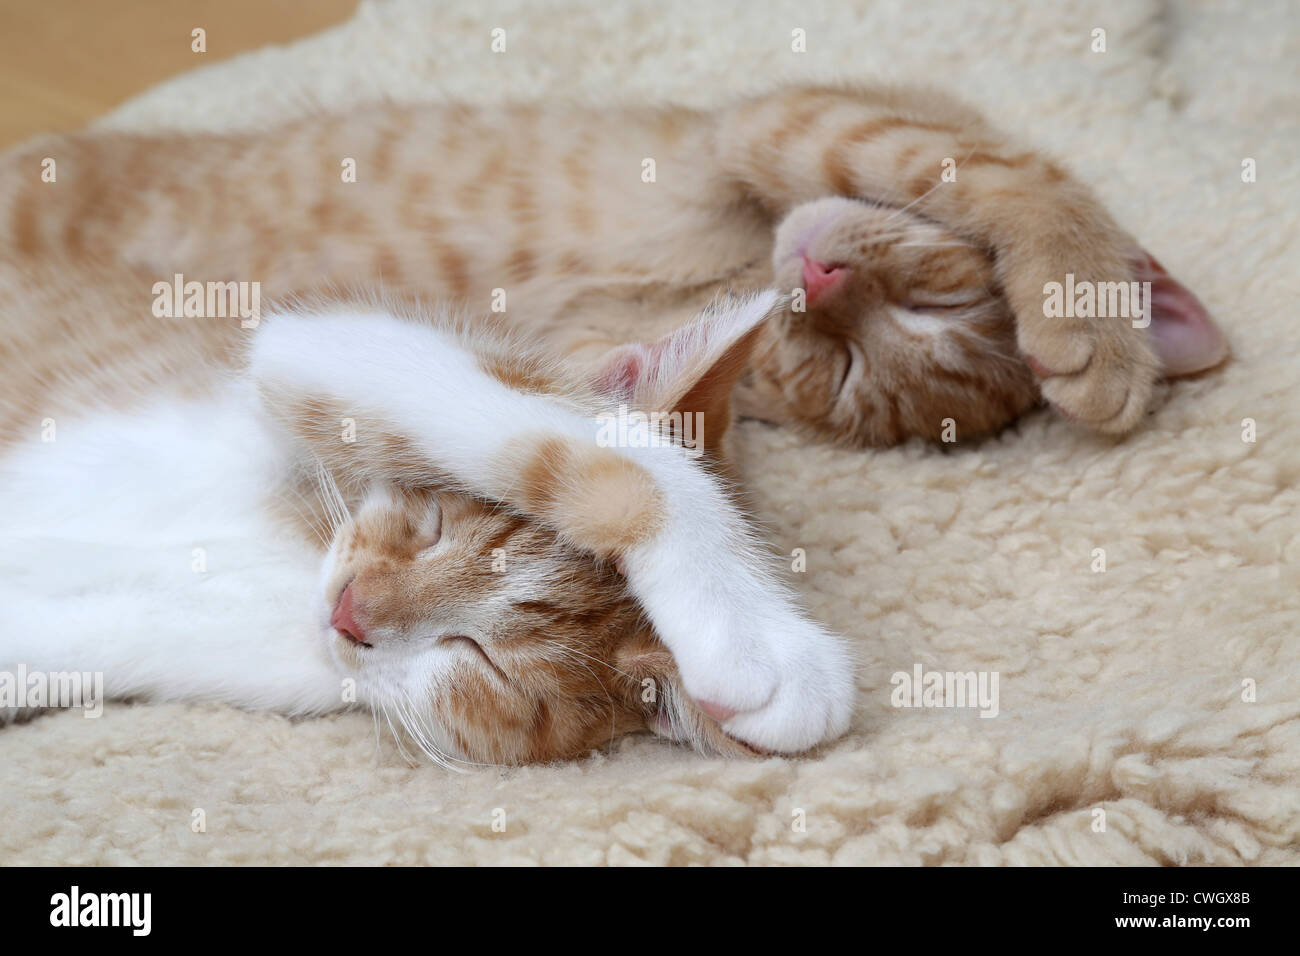 Two Ginger Kittens Sleeping Together In Identical Positions Stock Photo